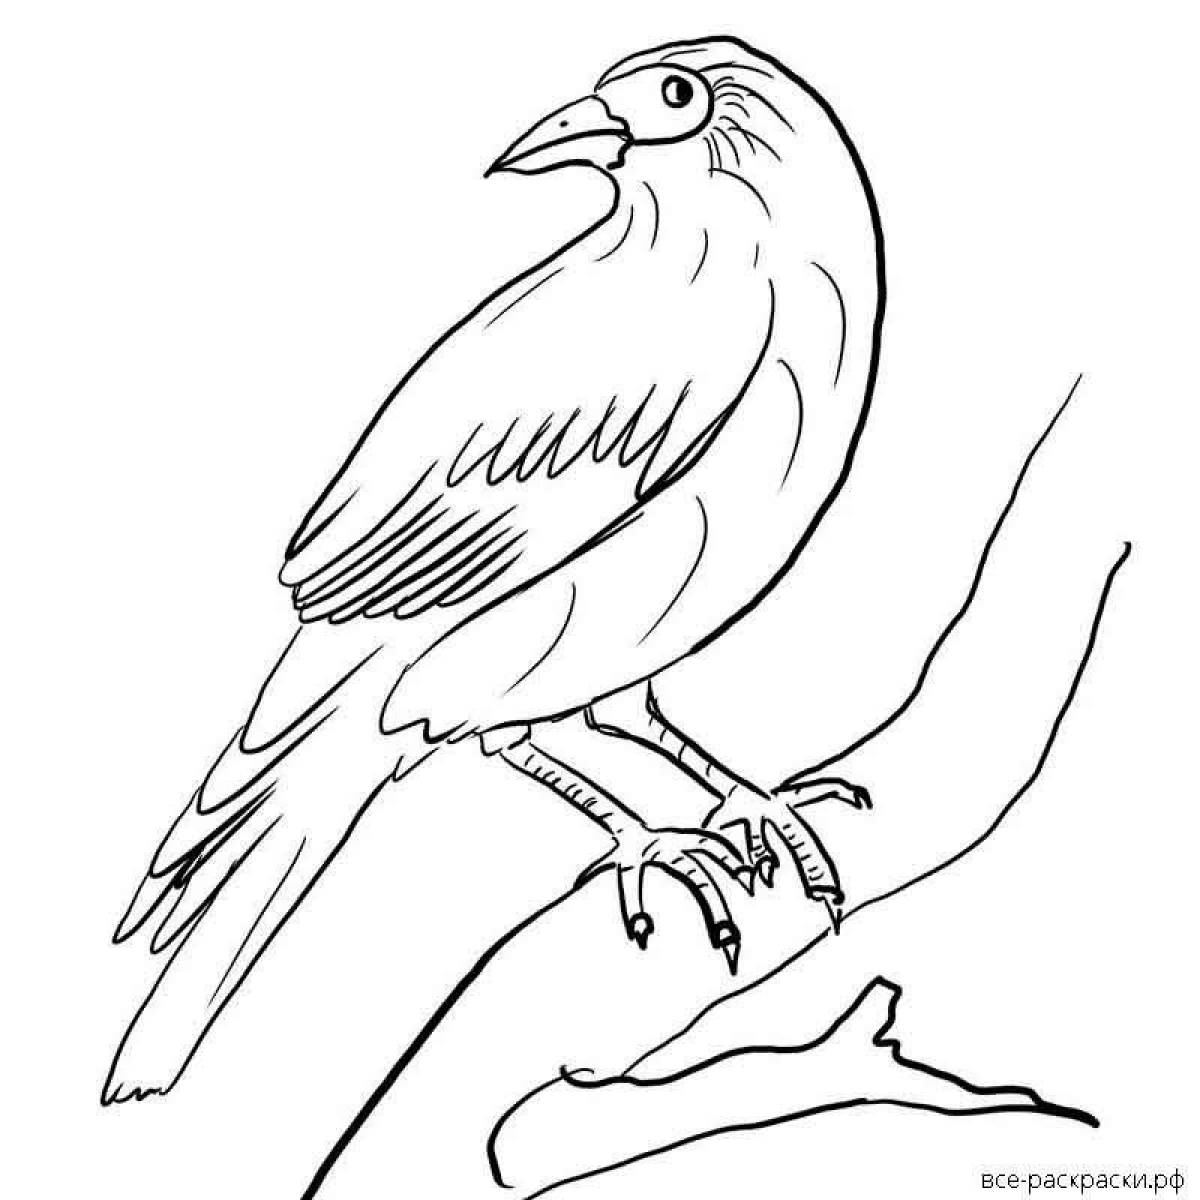 Colorful crow coloring book for kids